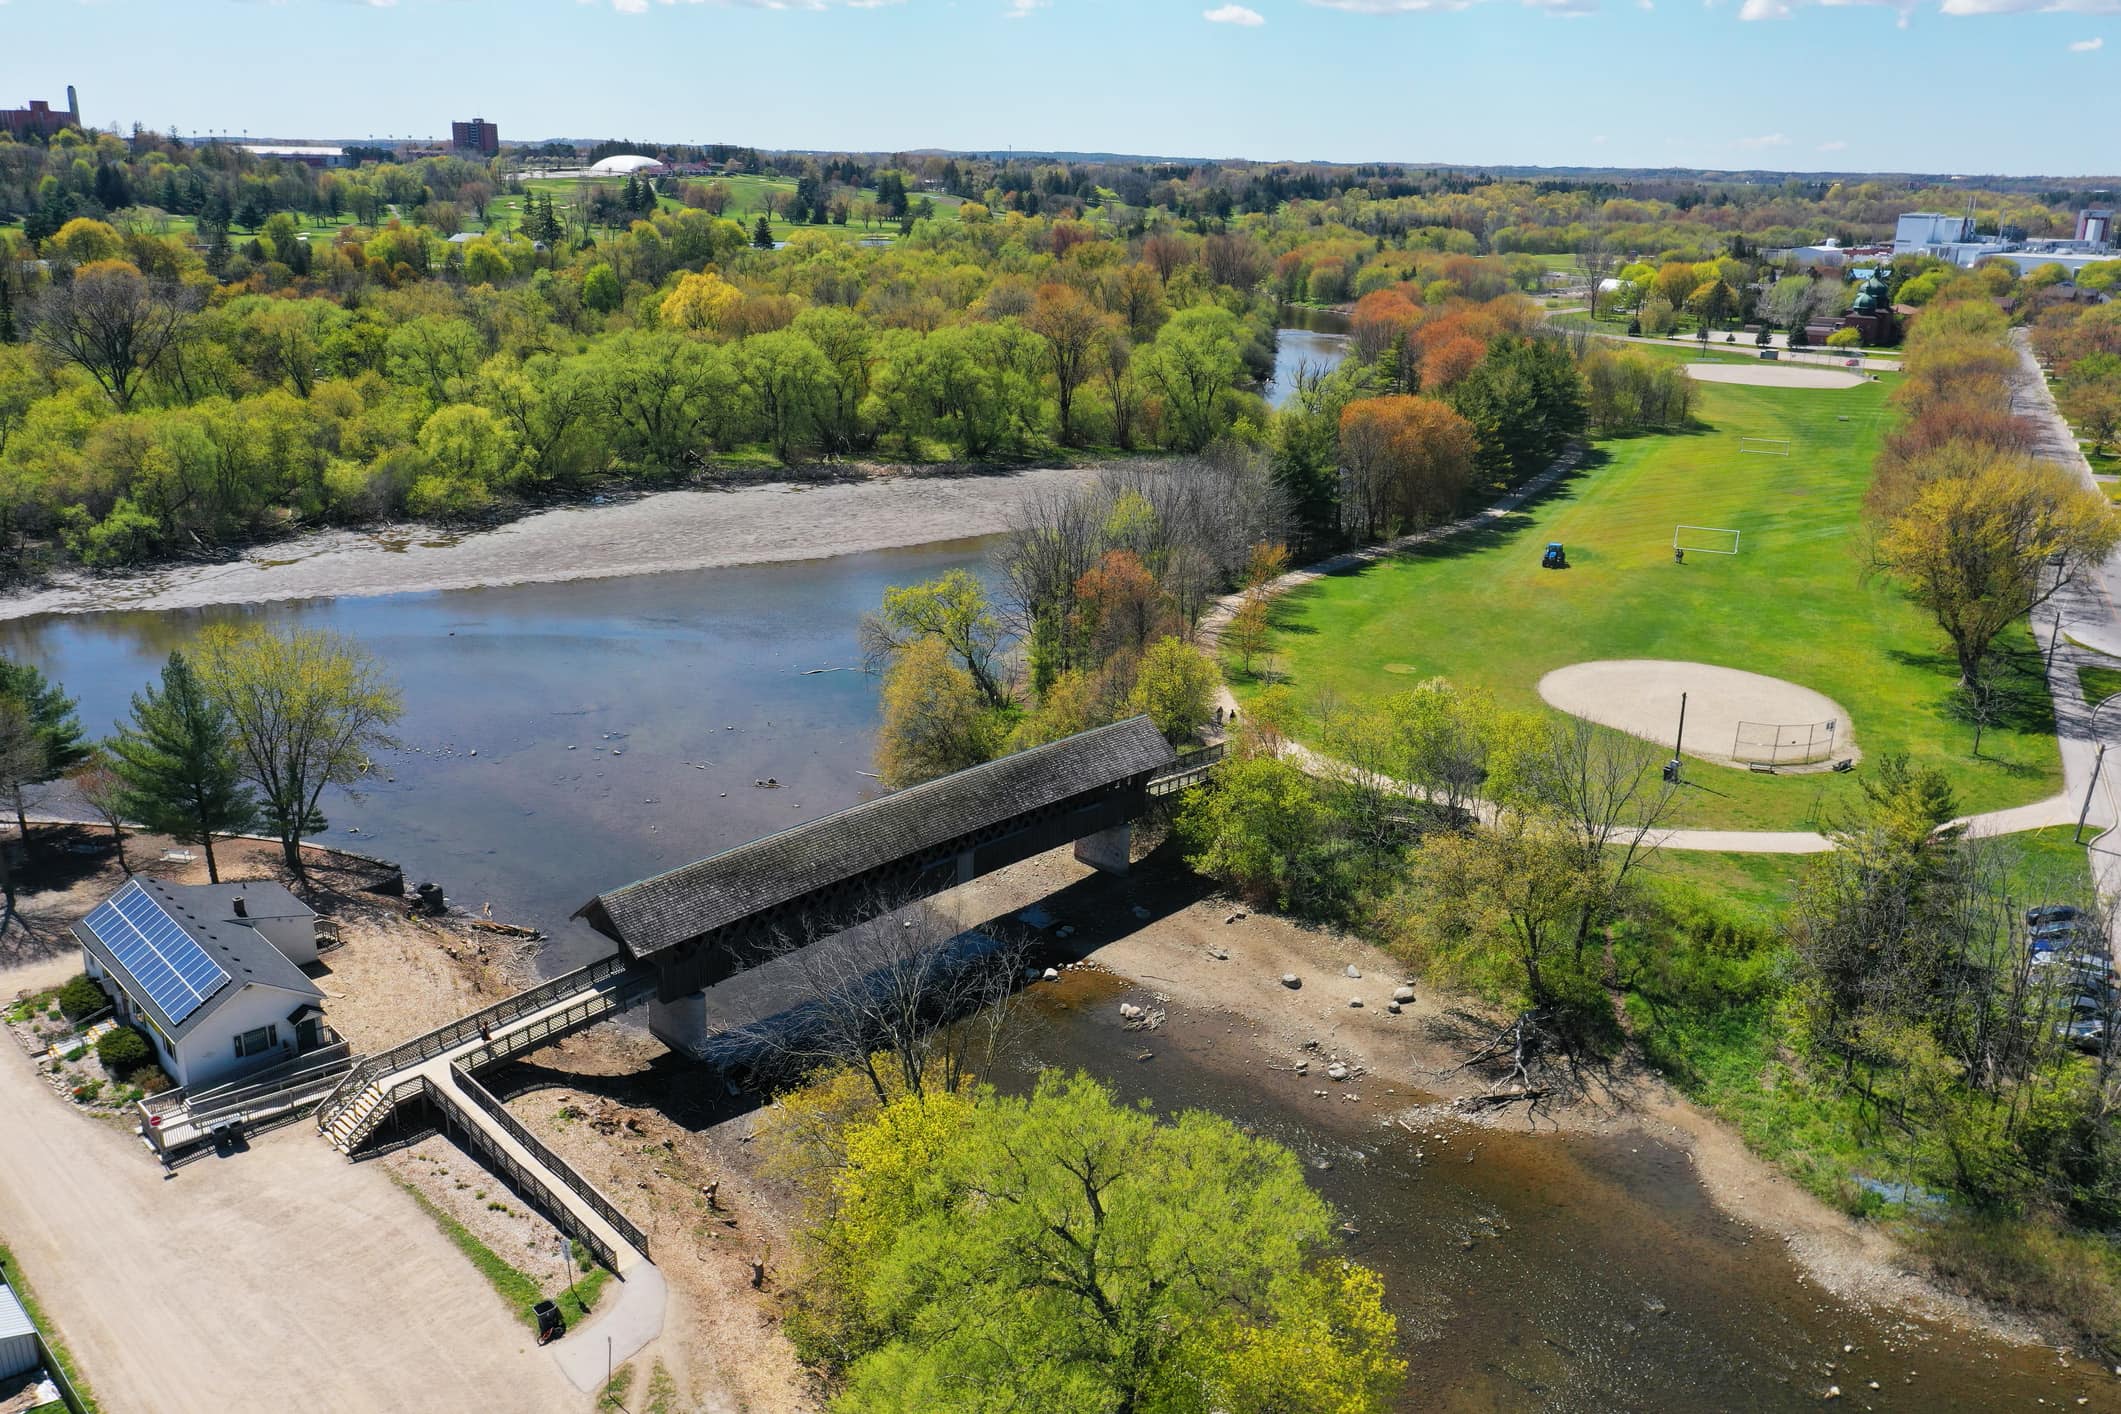 Aerial view of the Guelph Covered Bridge in Guelph, Ontario, Canada